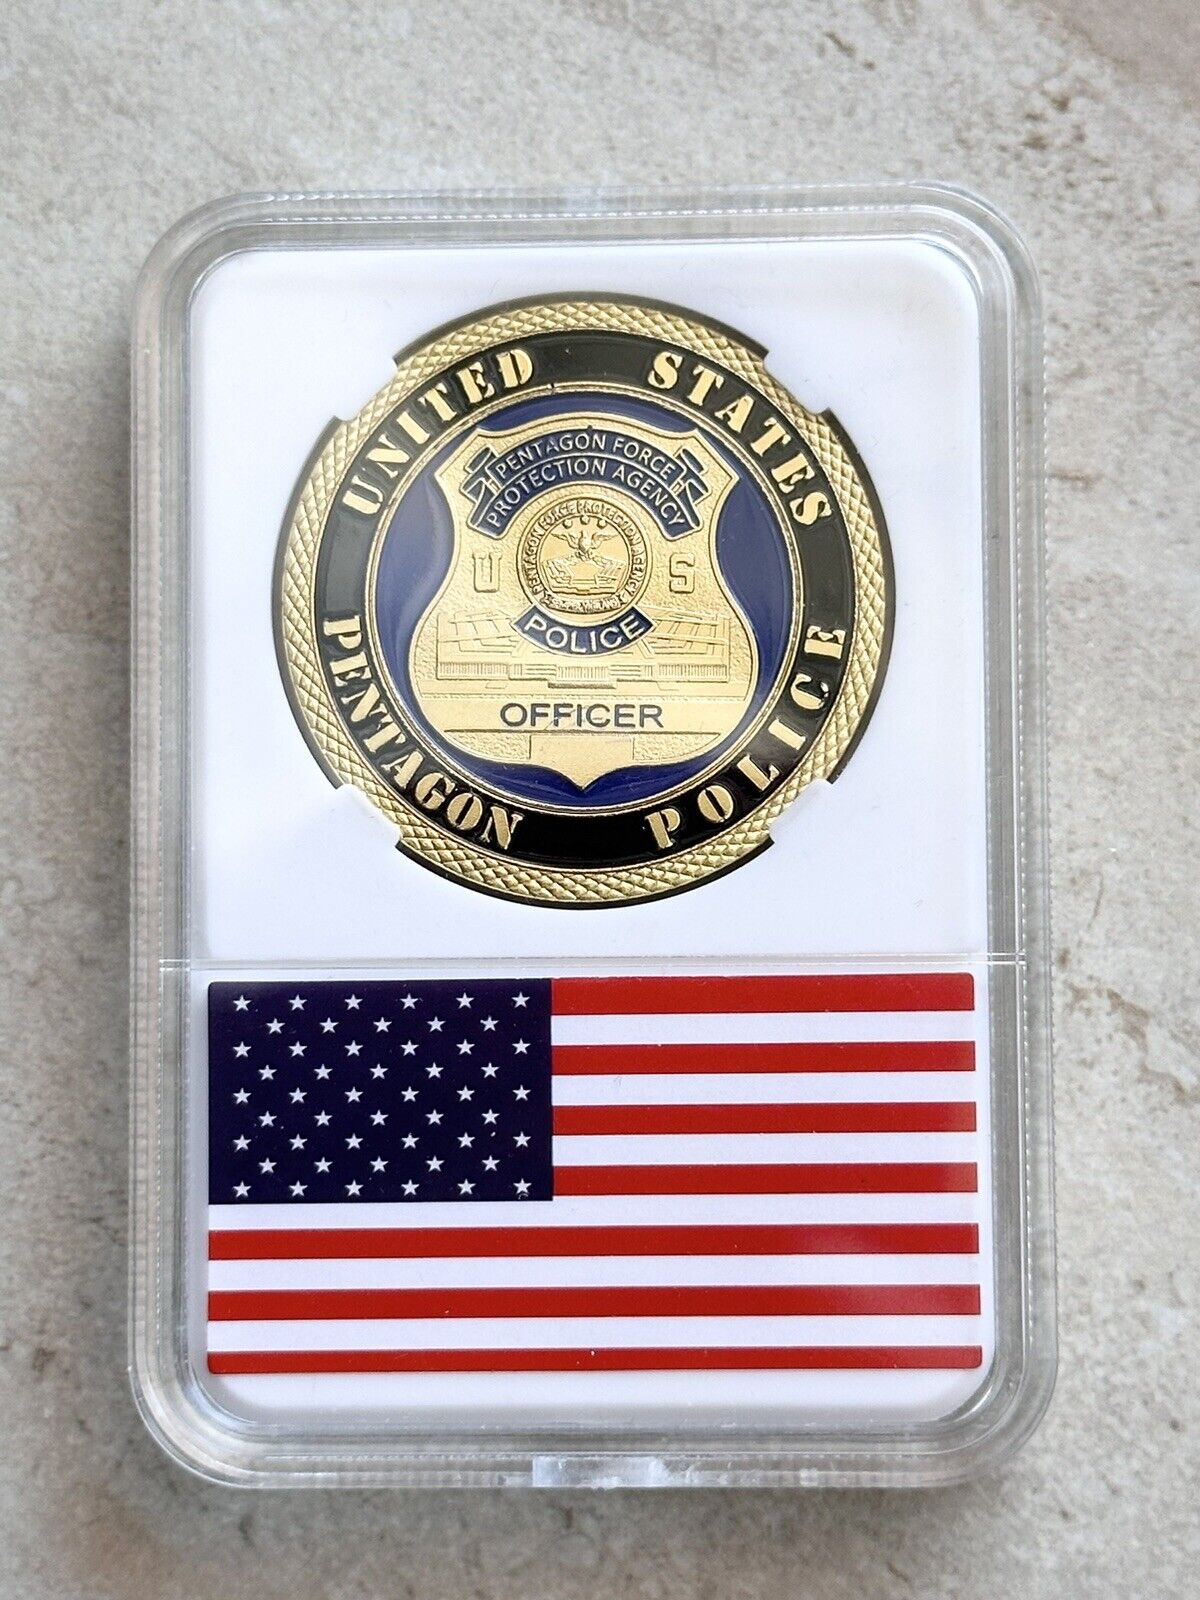 United States PENTAGON POLICE Officer Challenge Coin